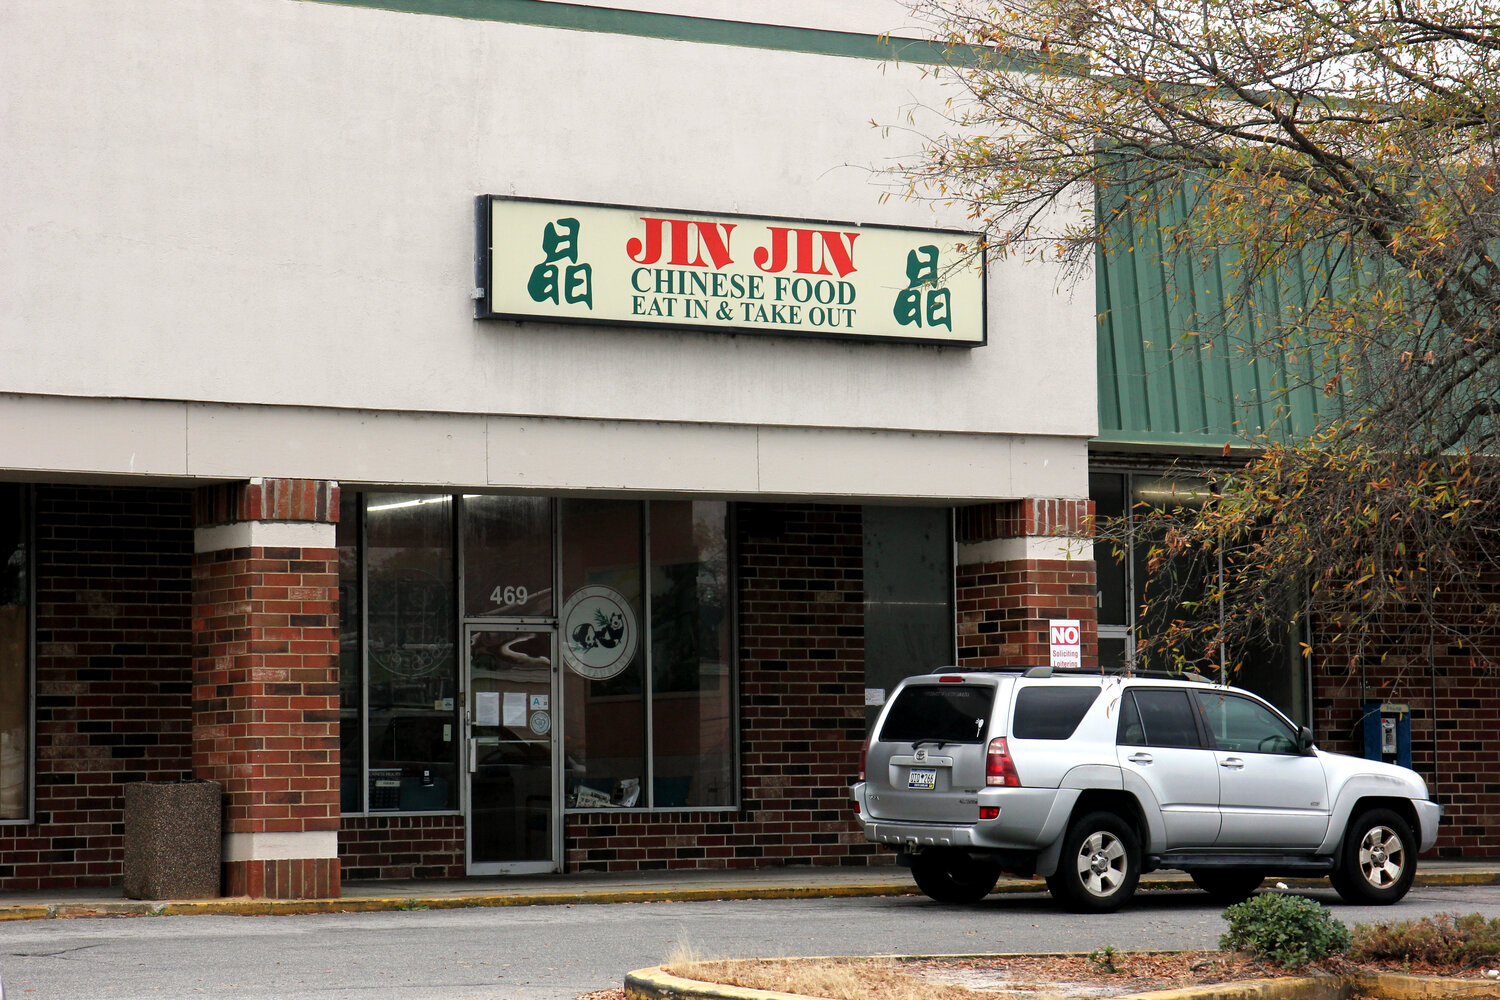 West Columbia's Jin Jin Chinese Restaurant announced Dec. 2 that it had shuttered after 29 years.